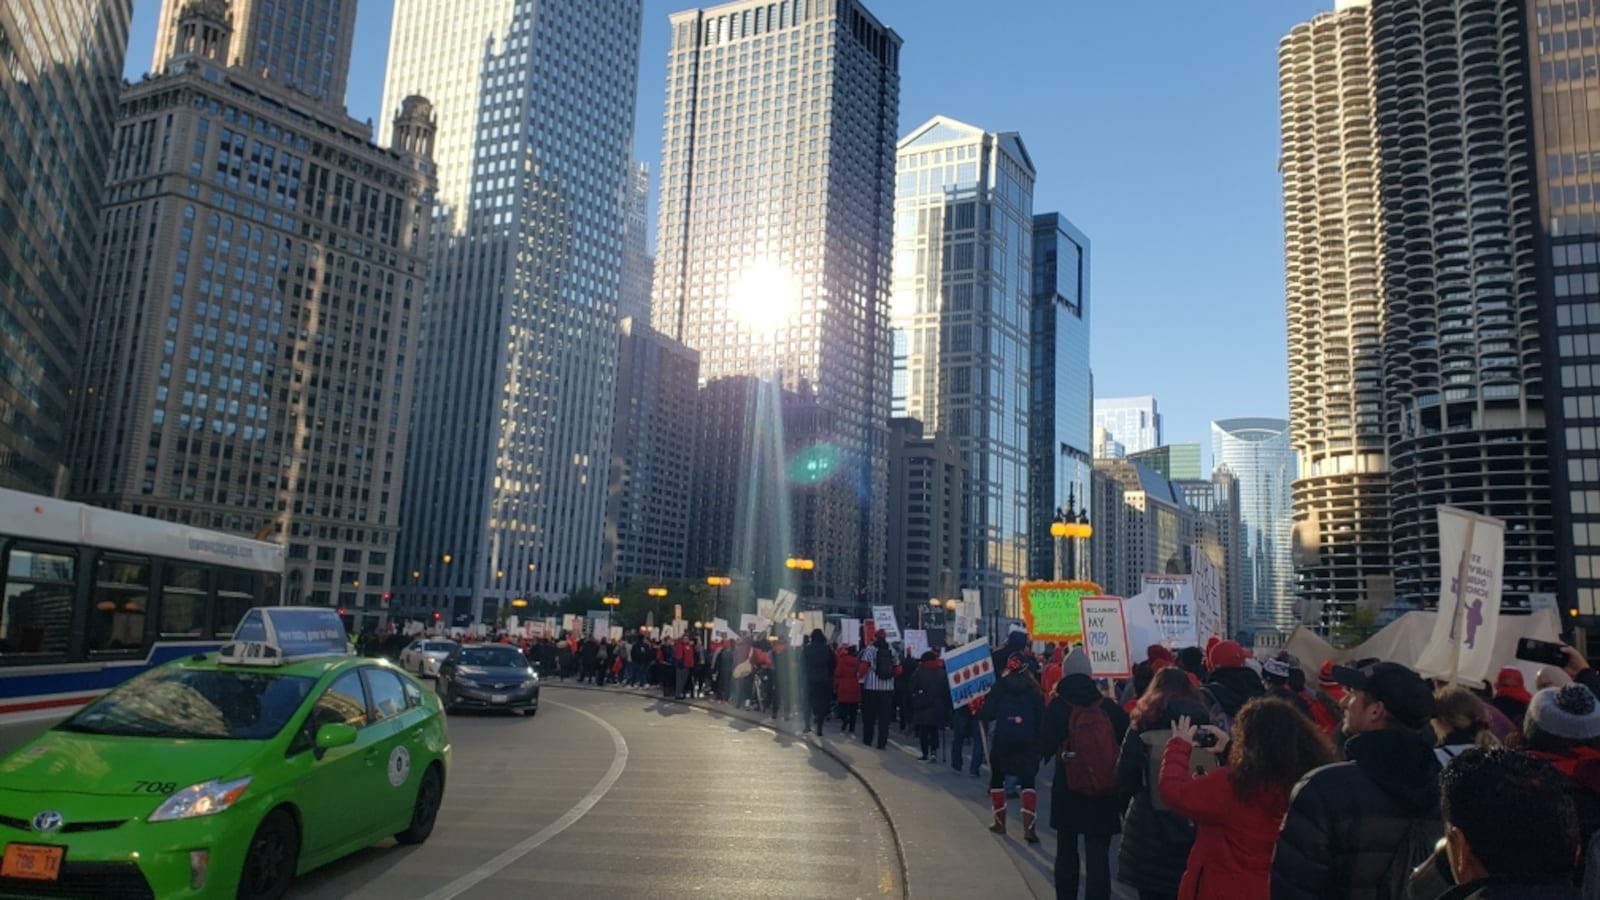 Chicago Teachers Union members lined Wacker Drive in preparation for a march to City Hall and rally on the fifth day of their strike, Oct. 23, 2019.